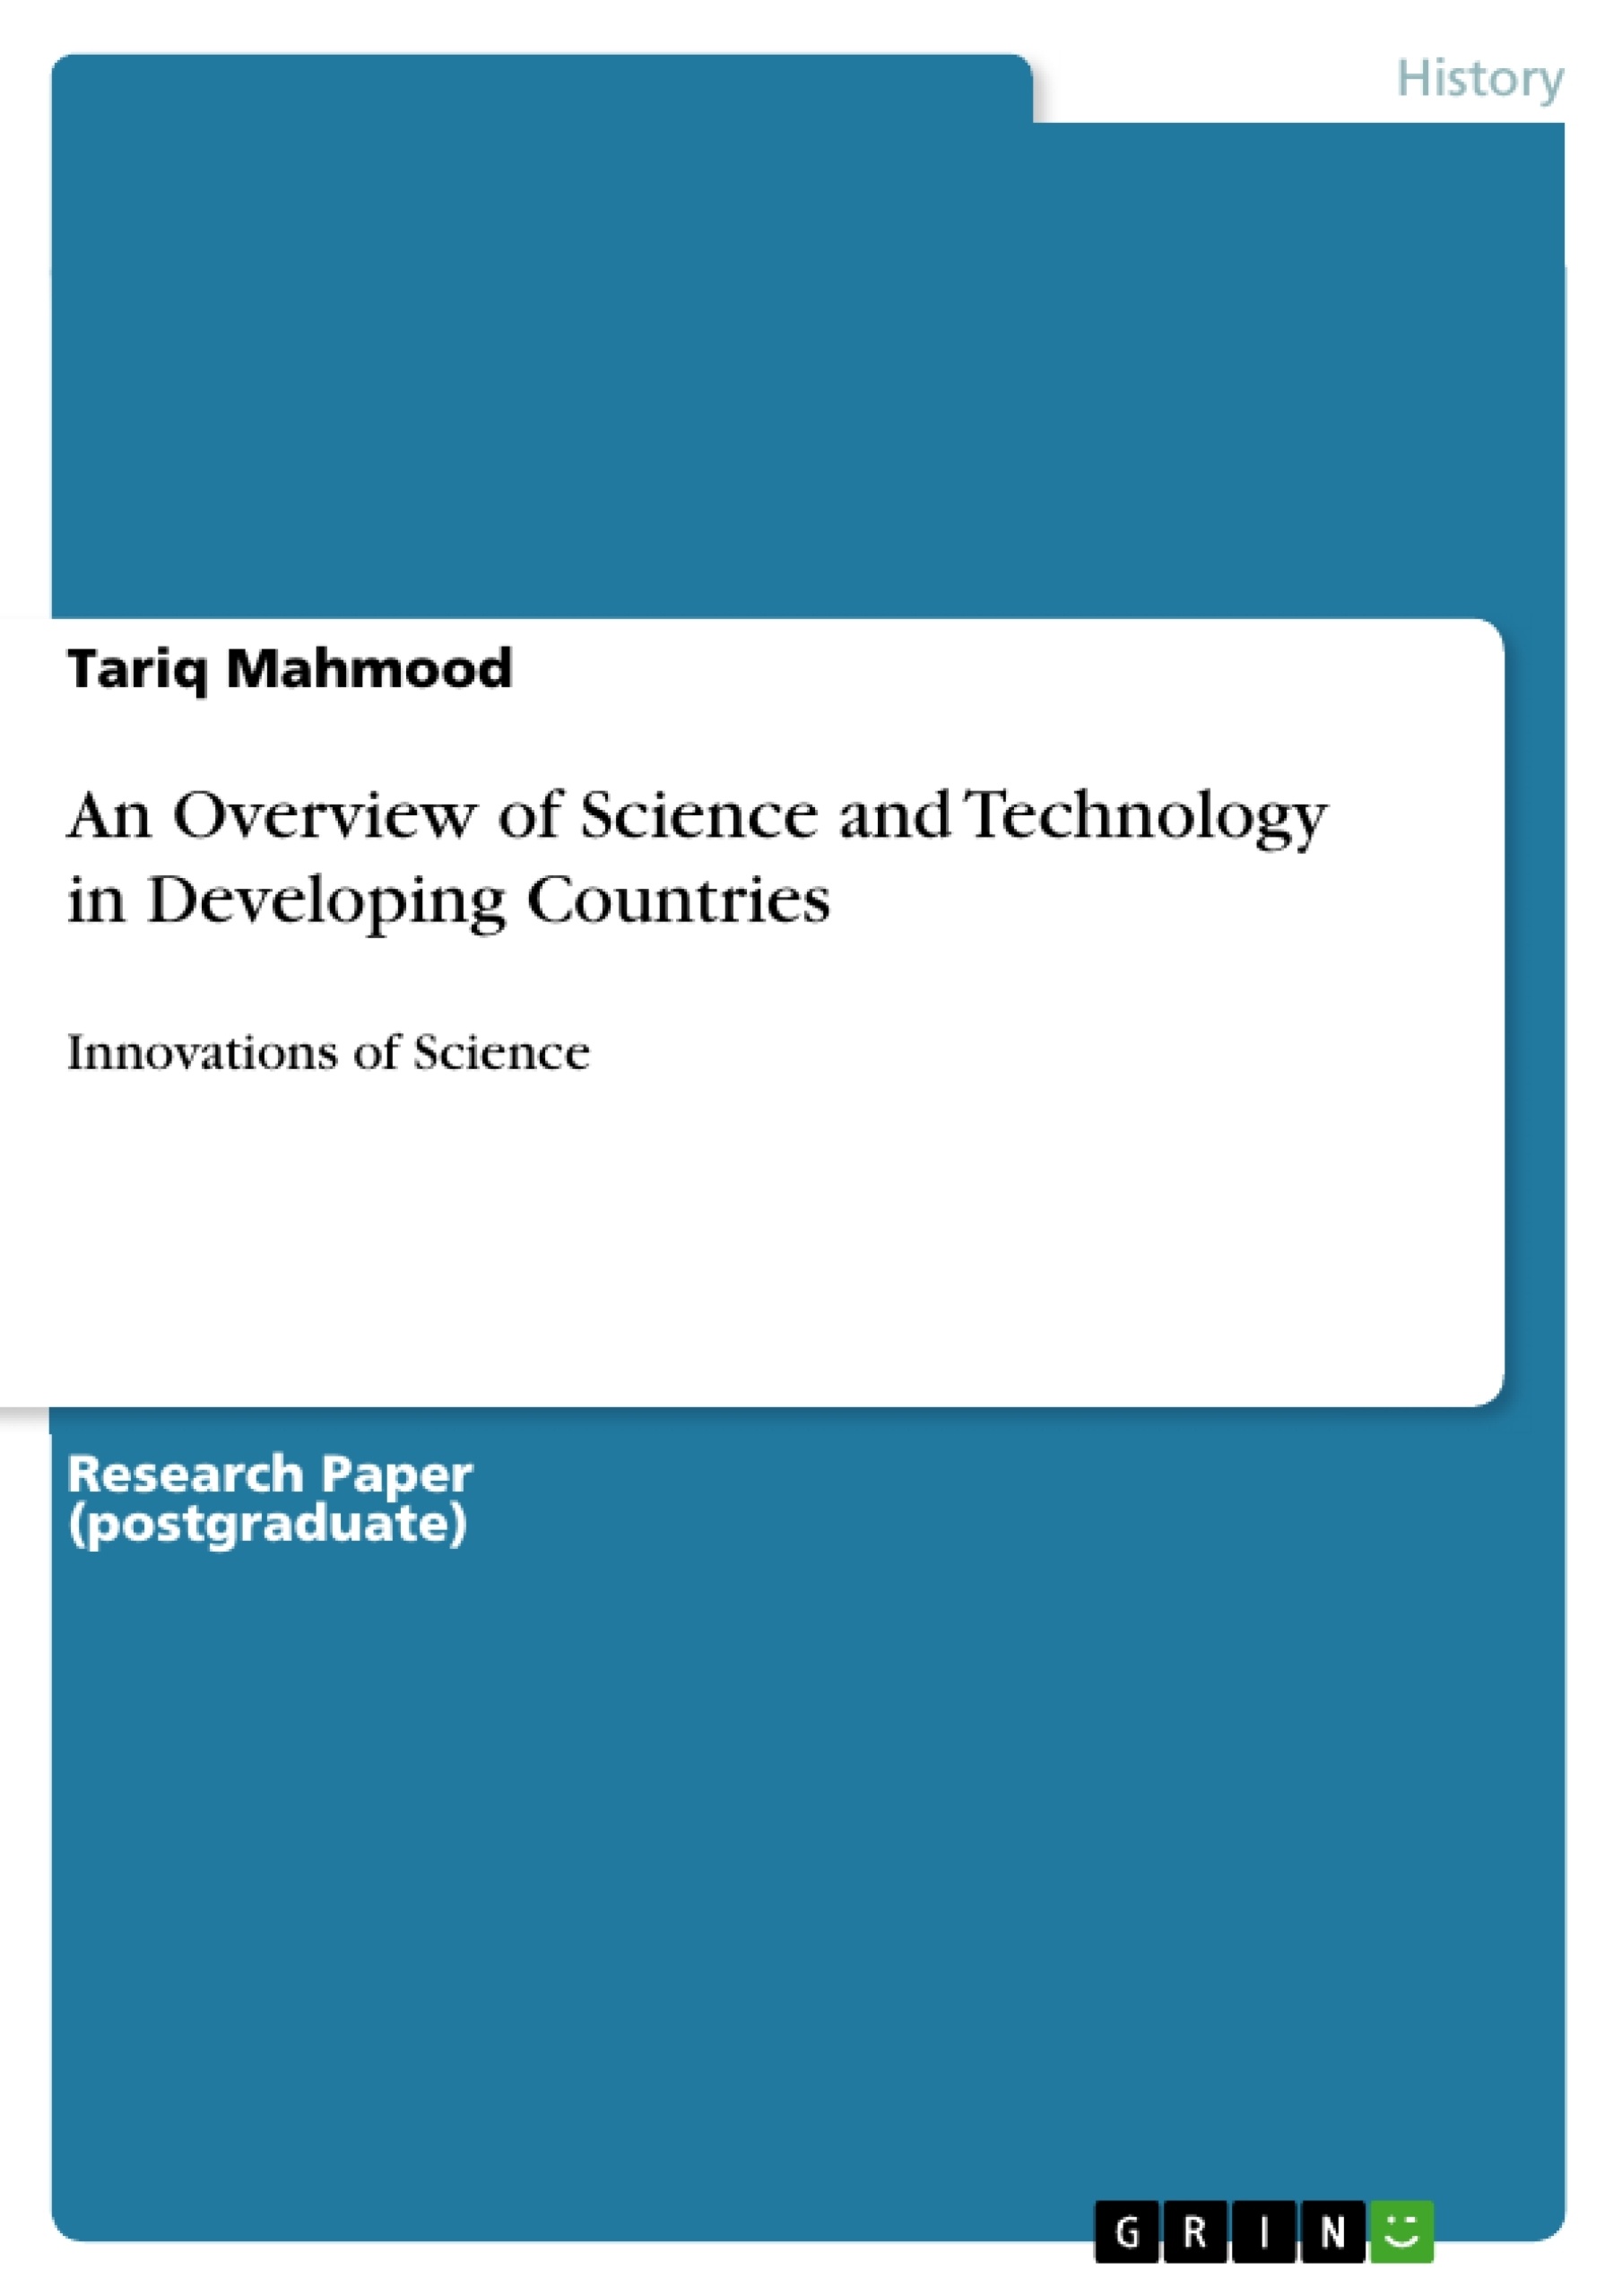 Título: An Overview of Science and Technology in Developing Countries